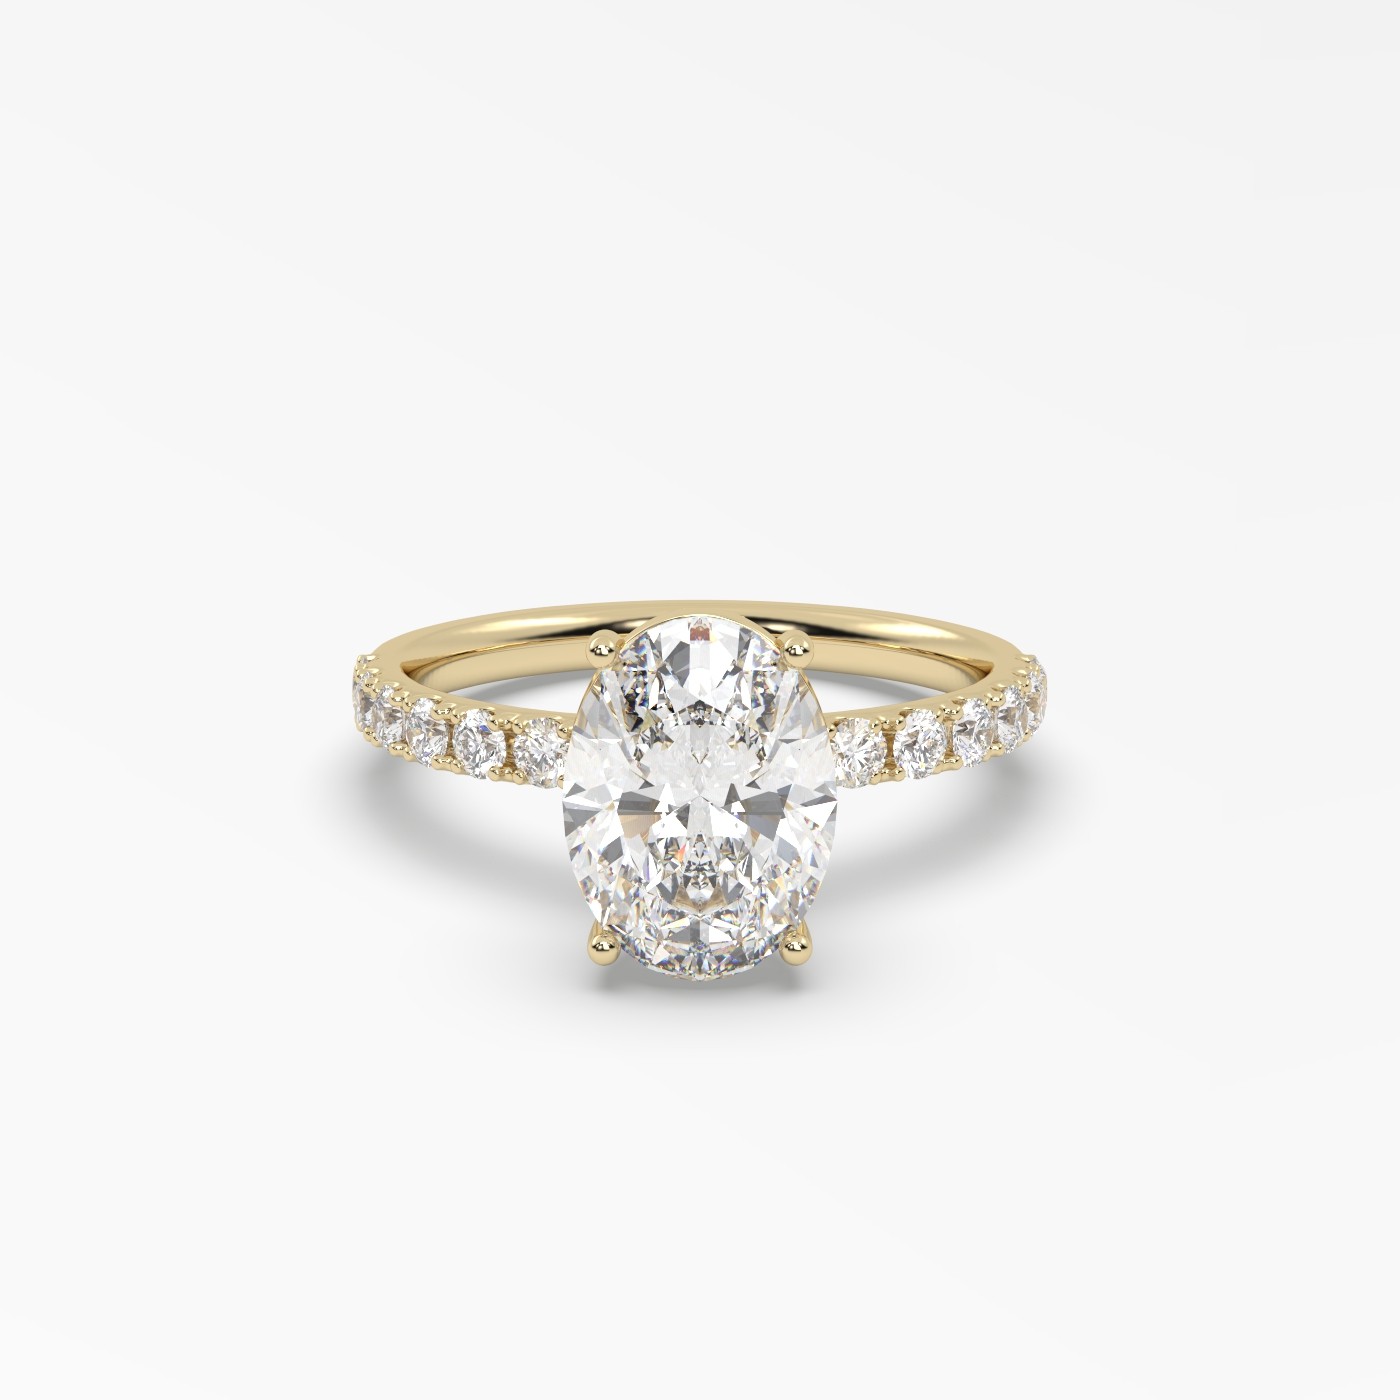 18K YELLOW GOLD Oval Diamond Pave Engagement Ring